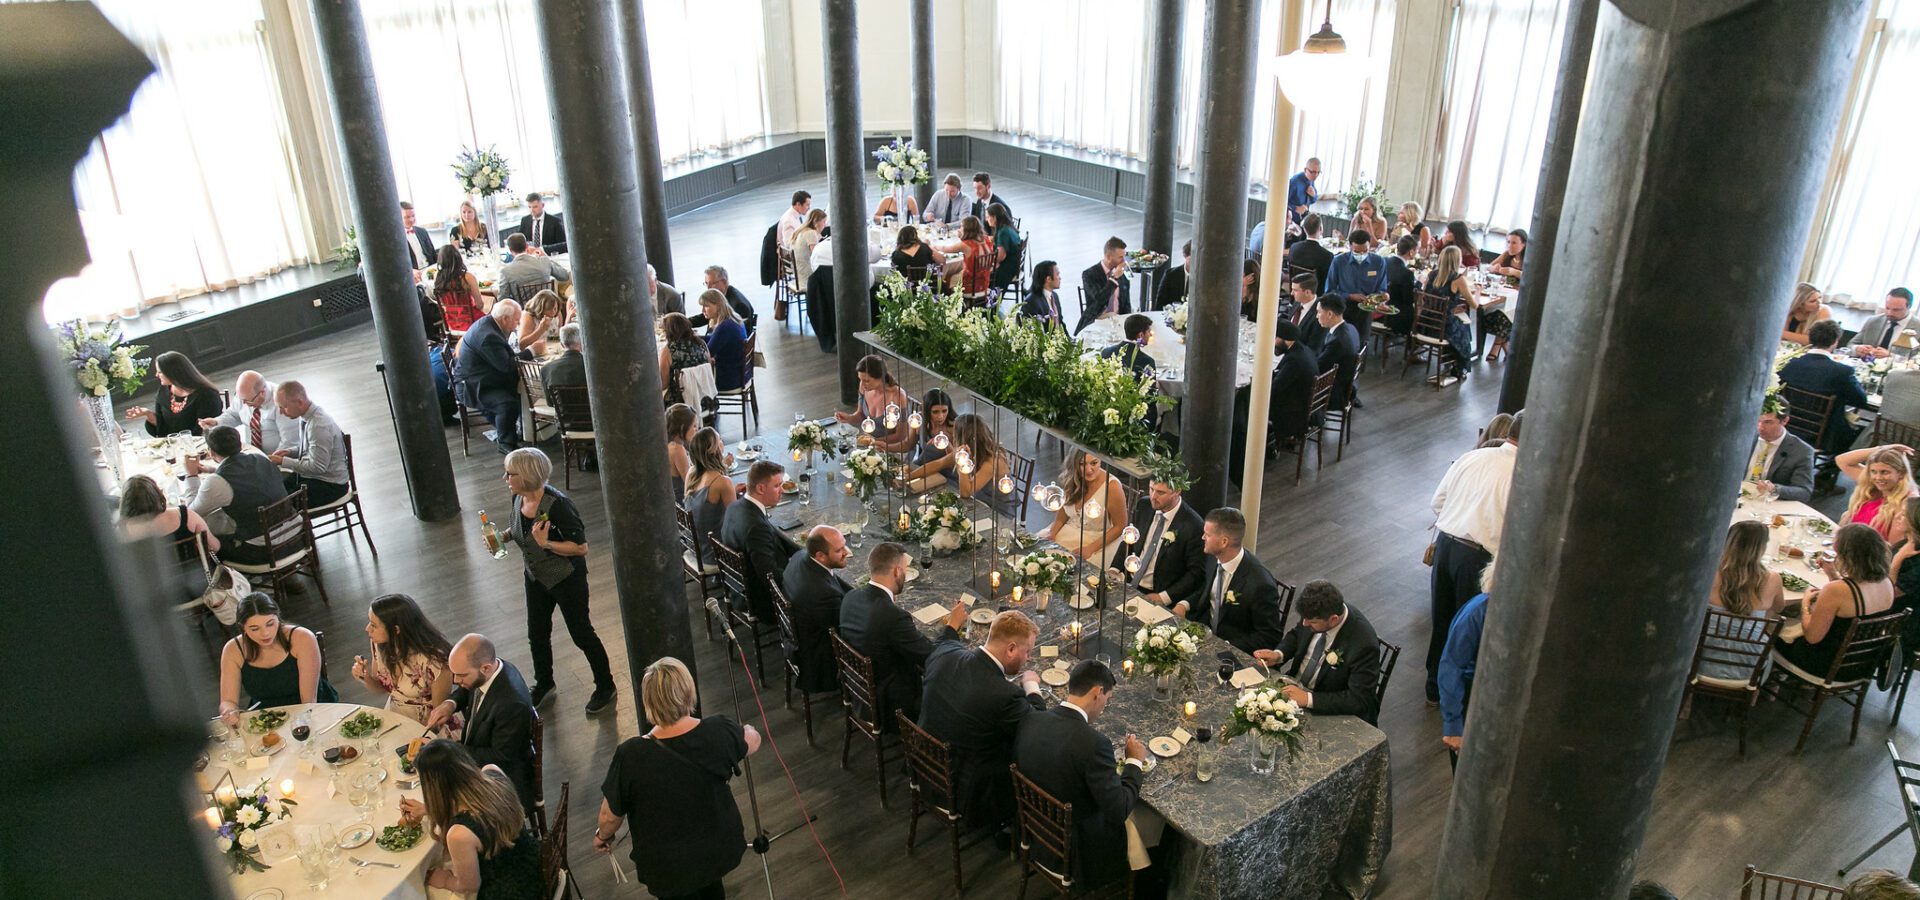 Overhead view of wedding dinner tables